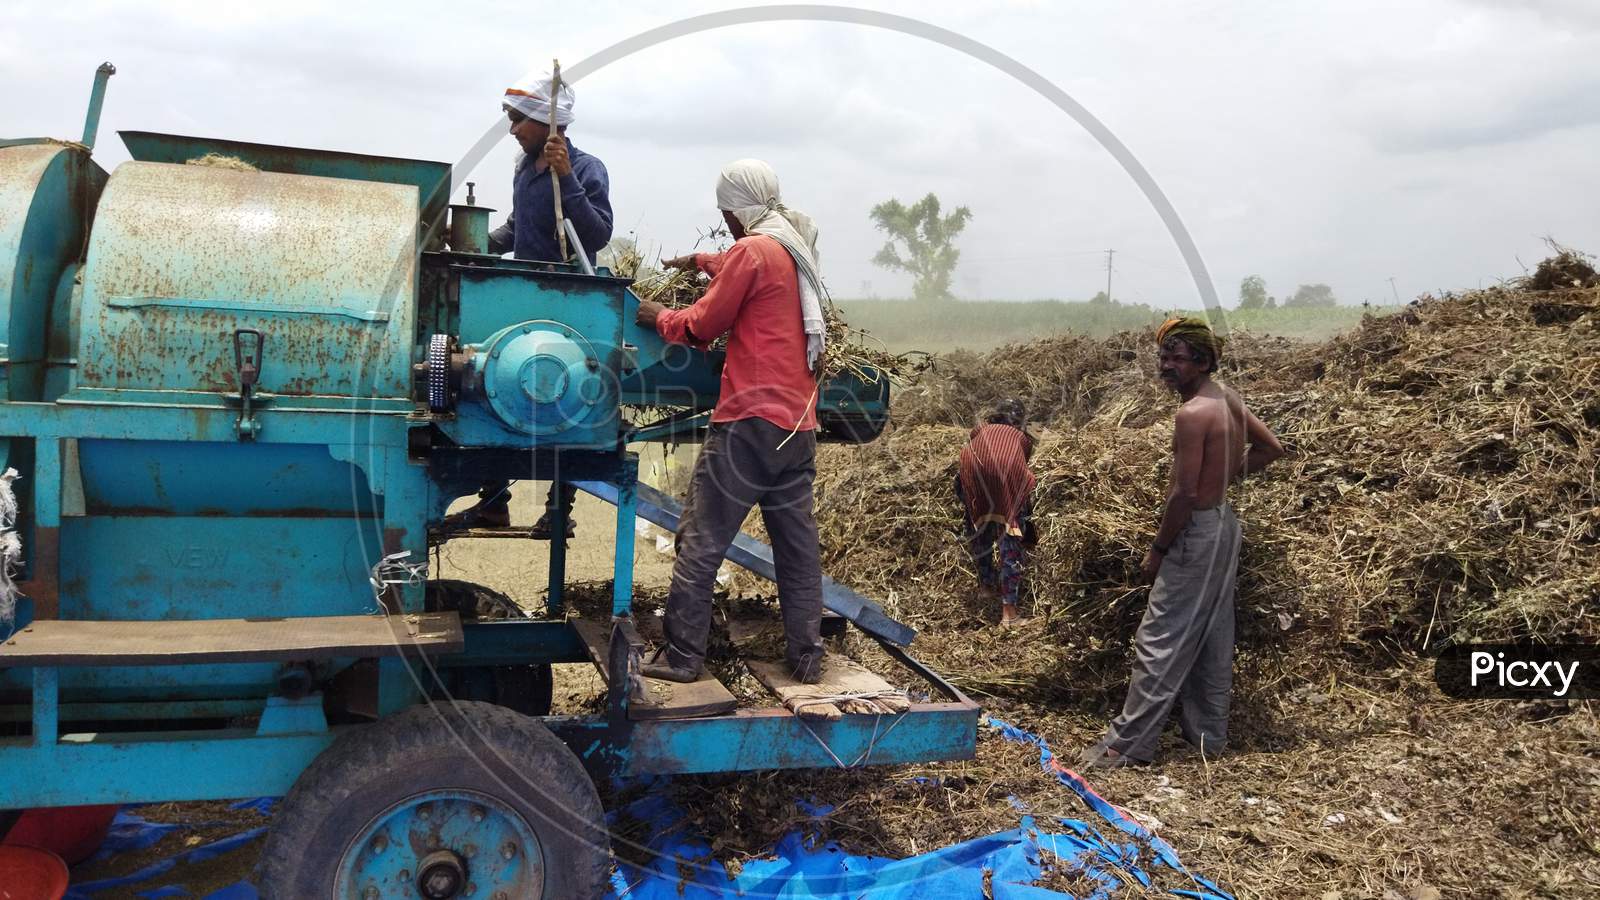 Indian farmers separating husk and moong grains using a thresher machine